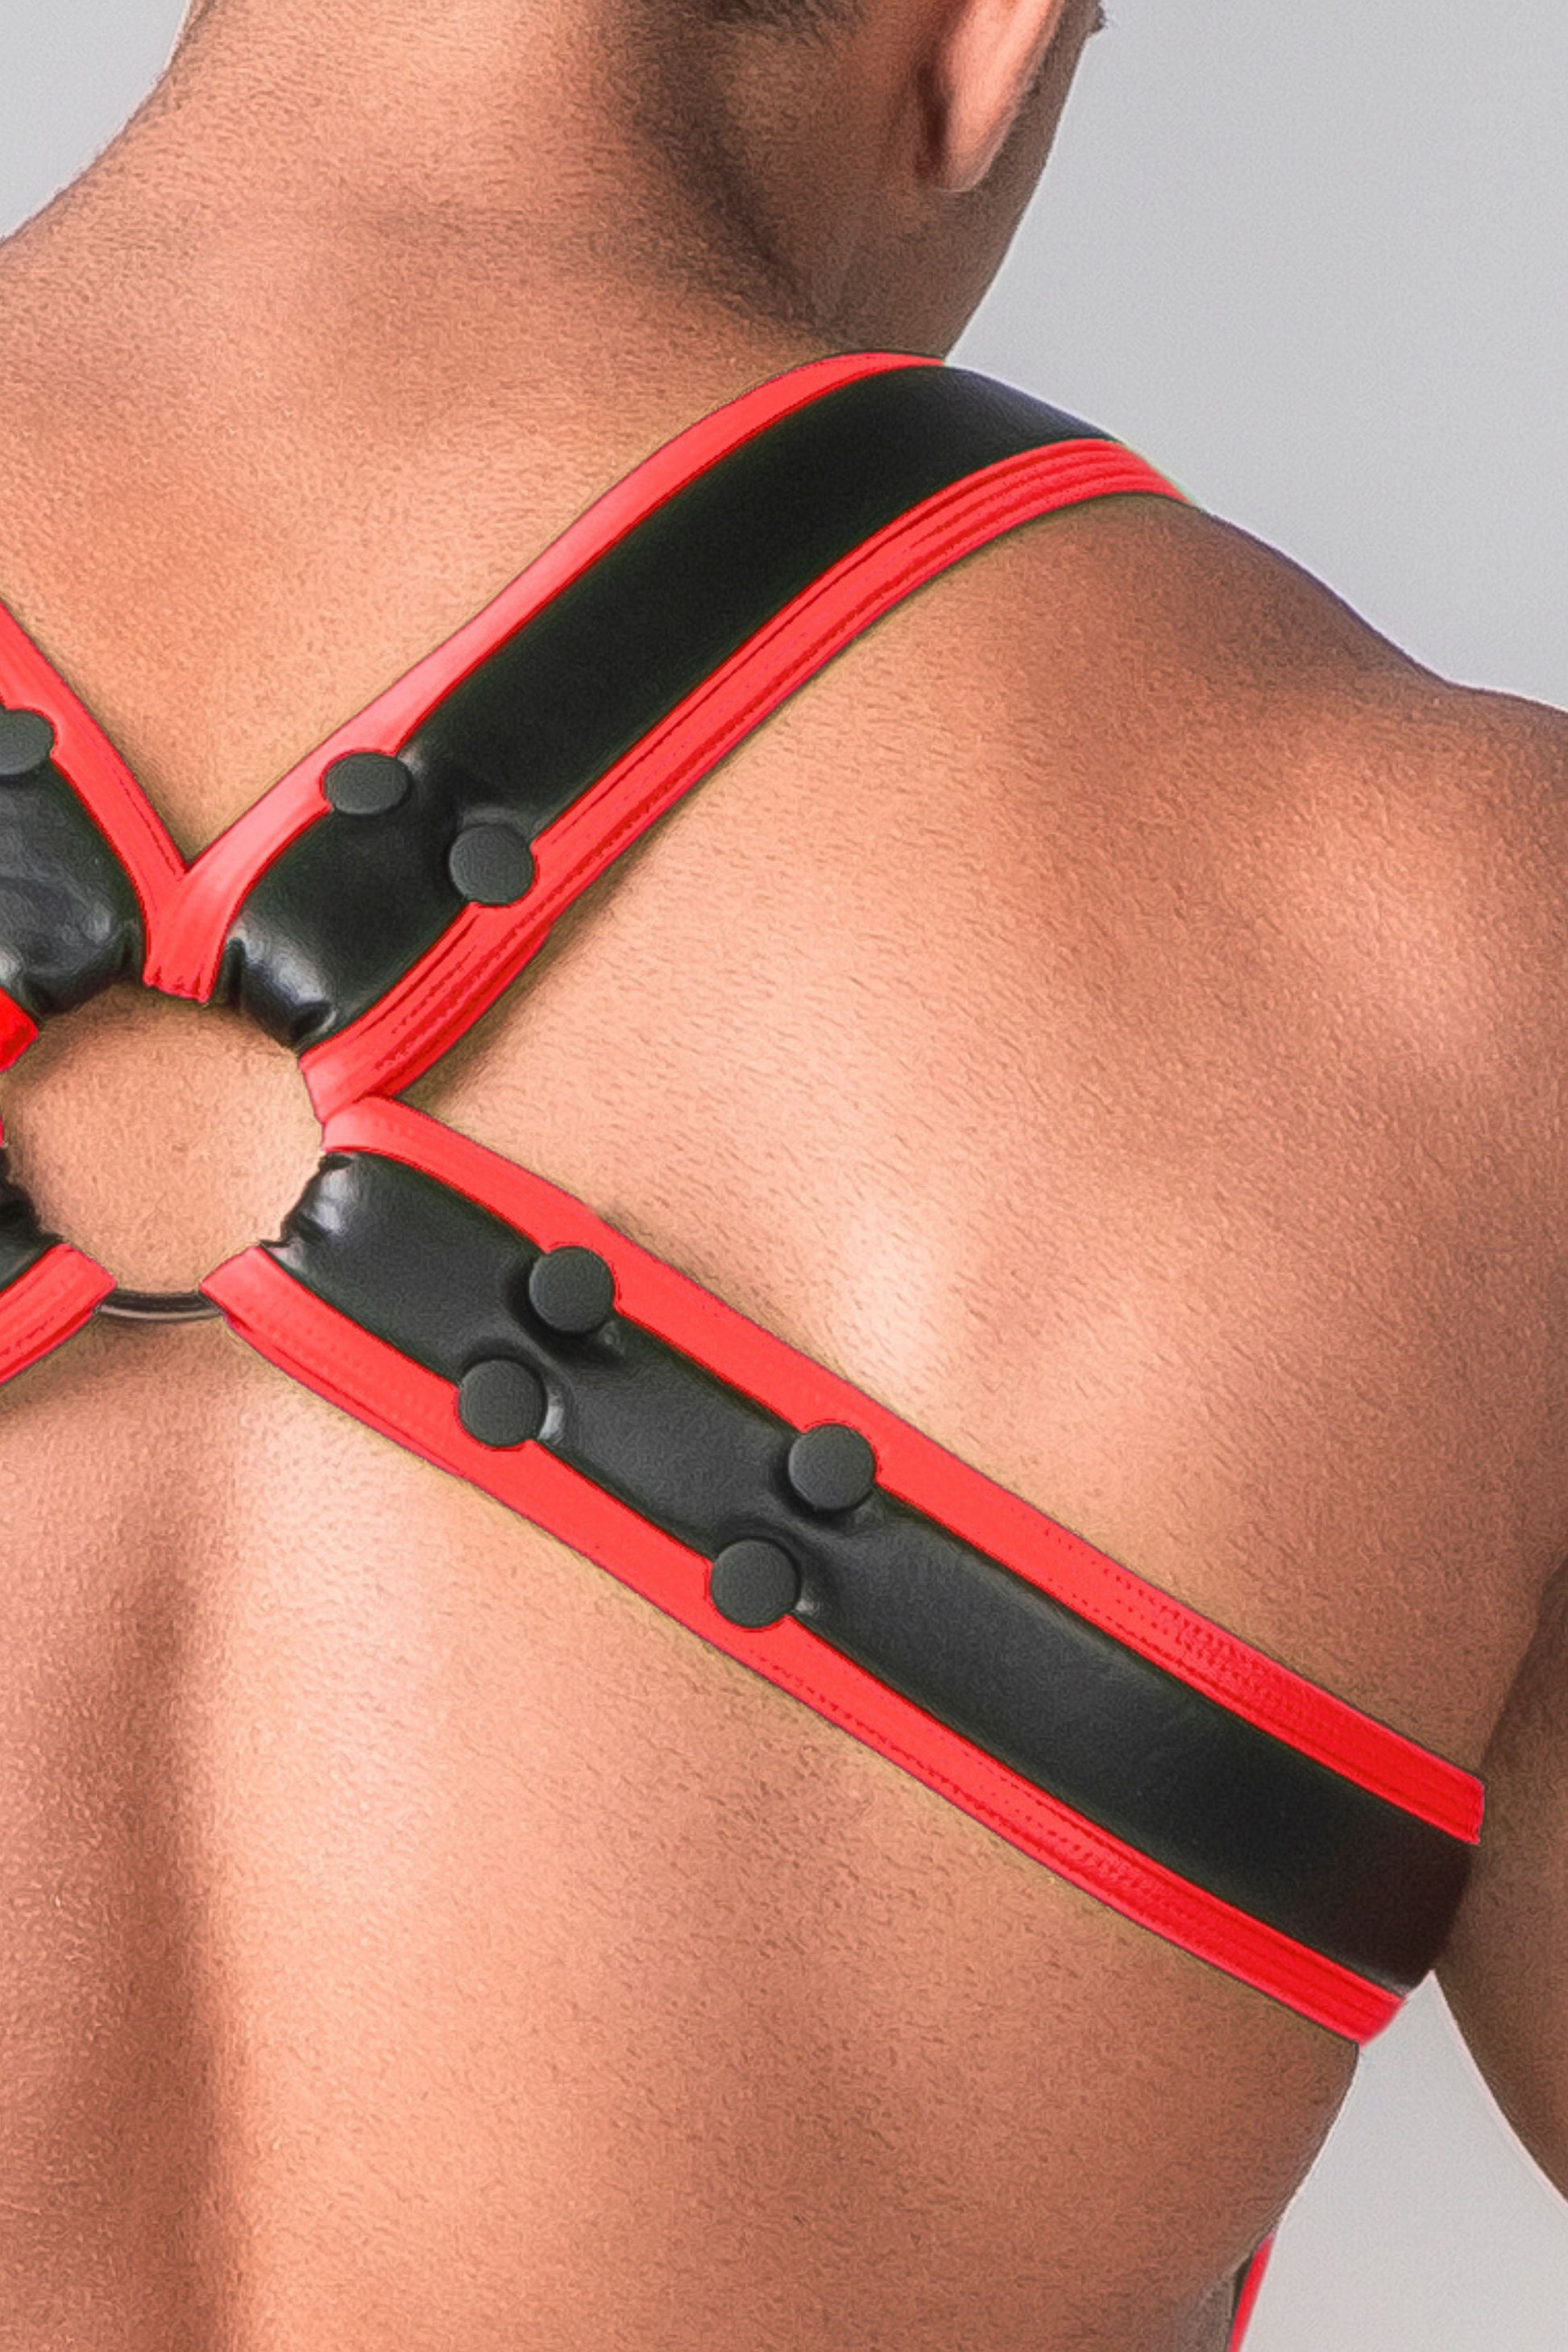 Youngero. Men's Body Harness. Black+Red